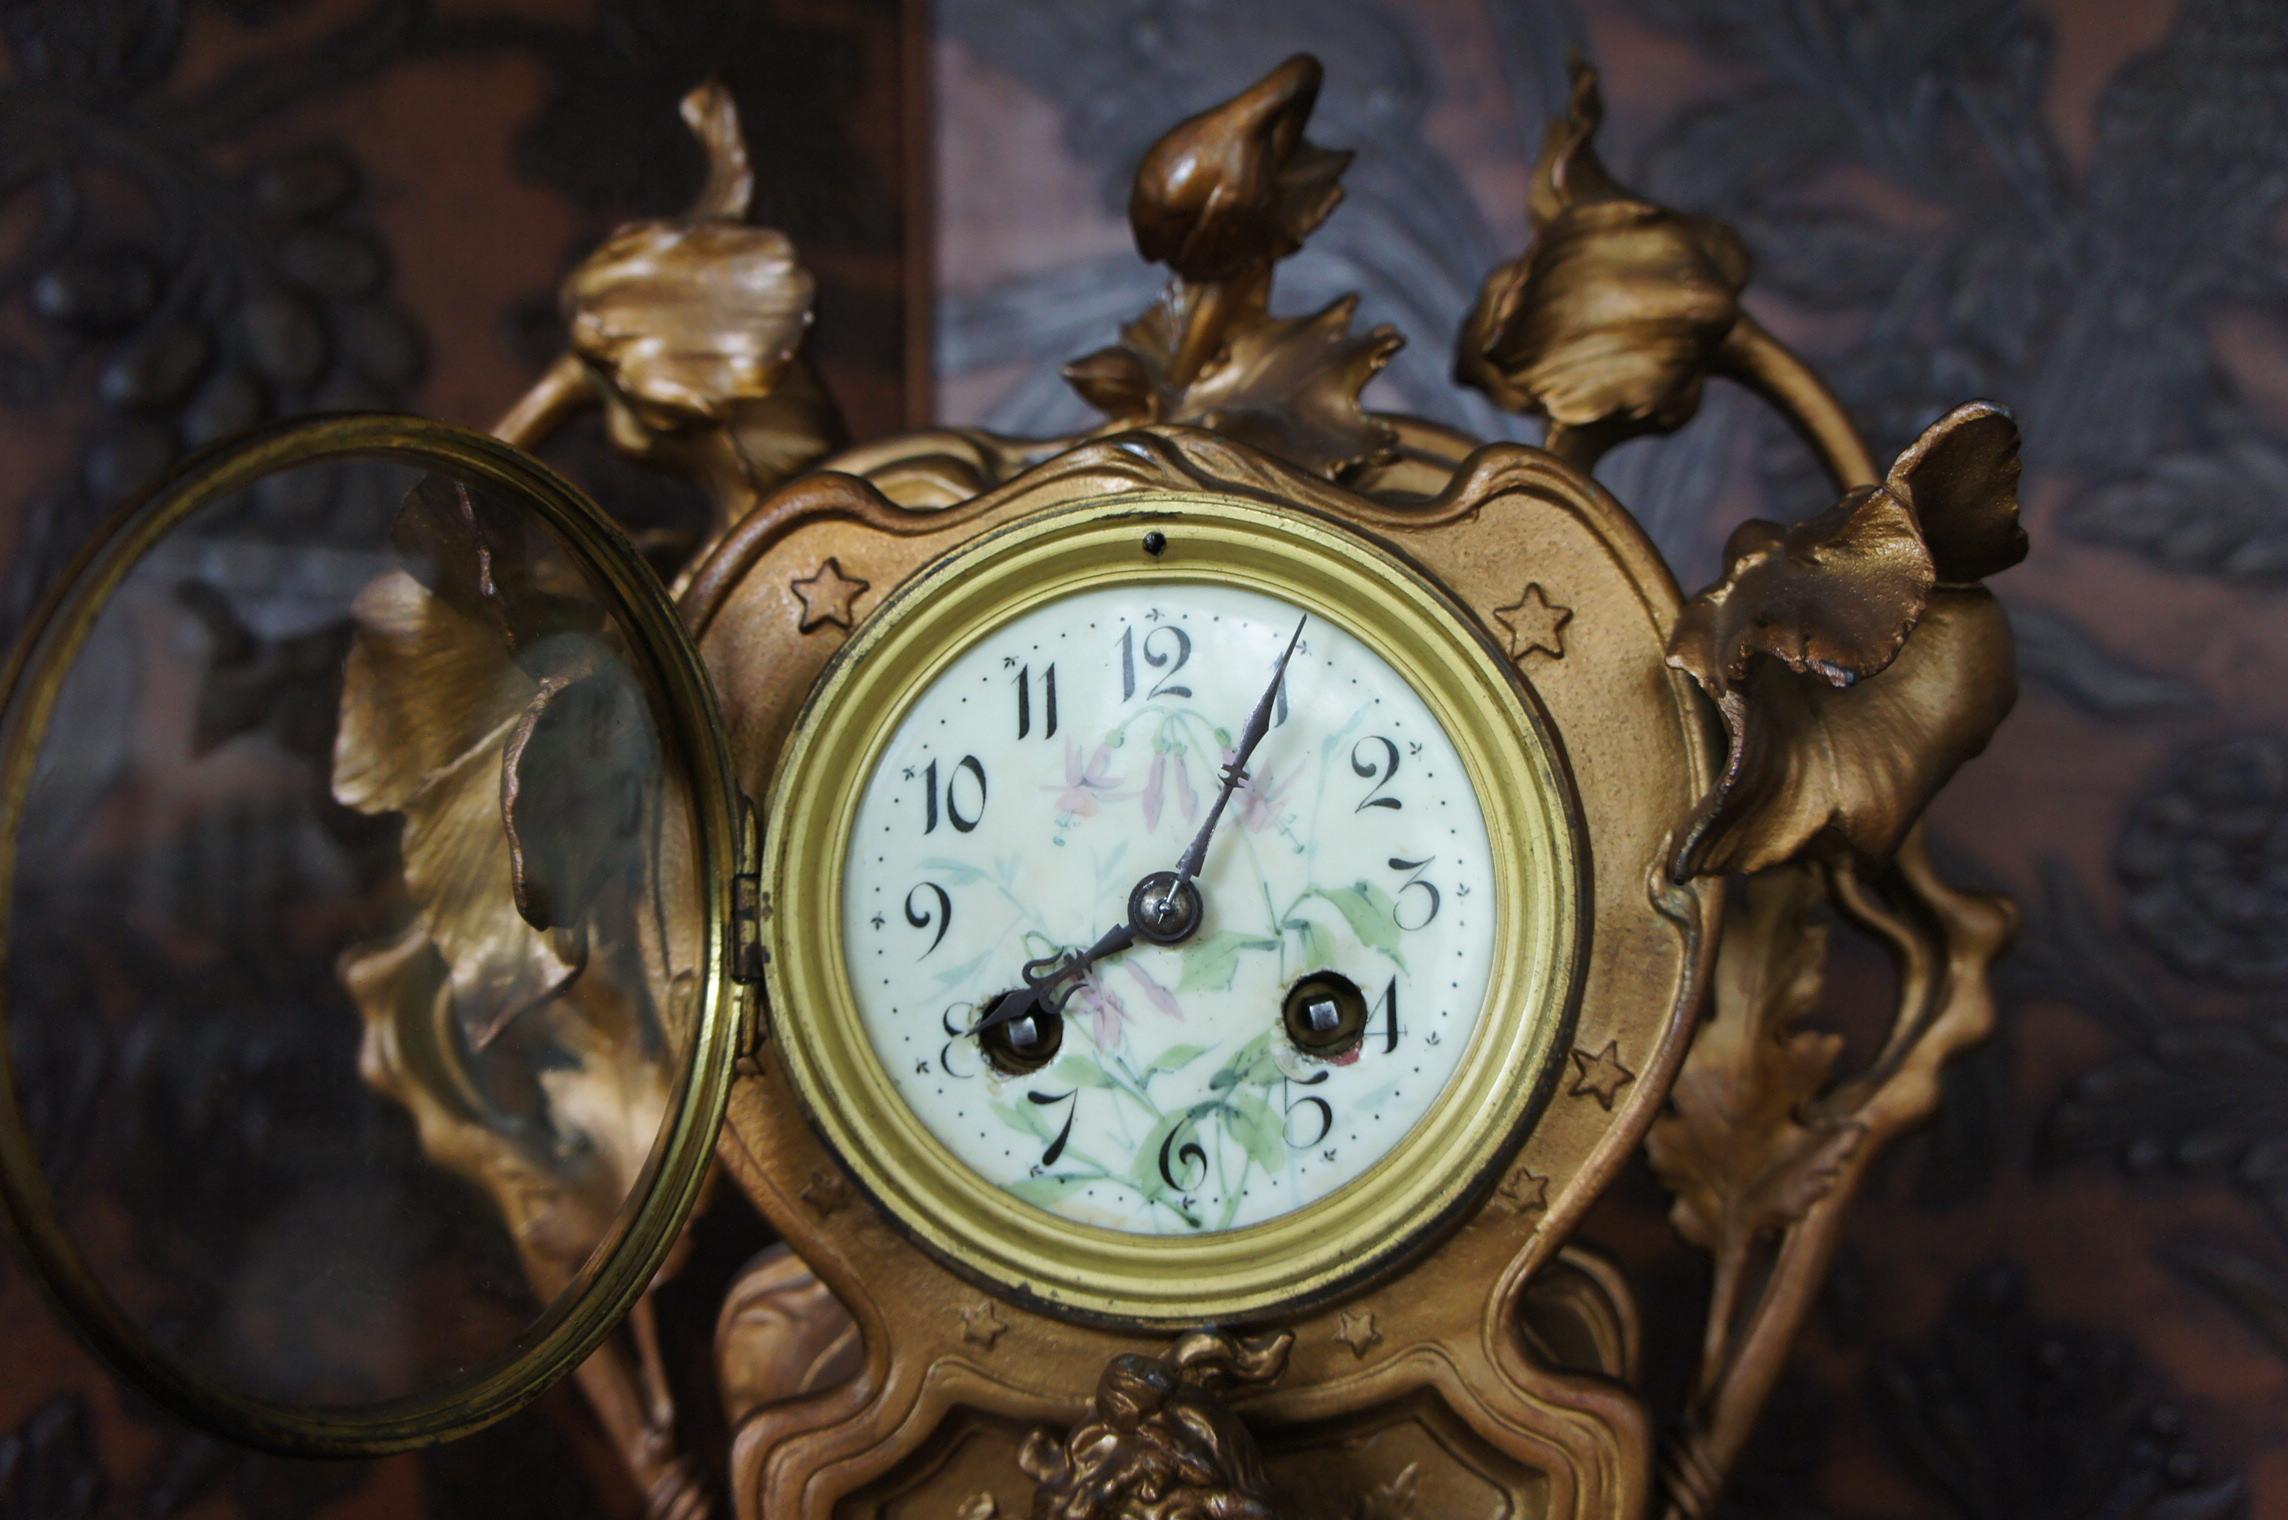 Stunning Early 20th Century Golden Color Art Nouveau Table or Mantel Clock 2